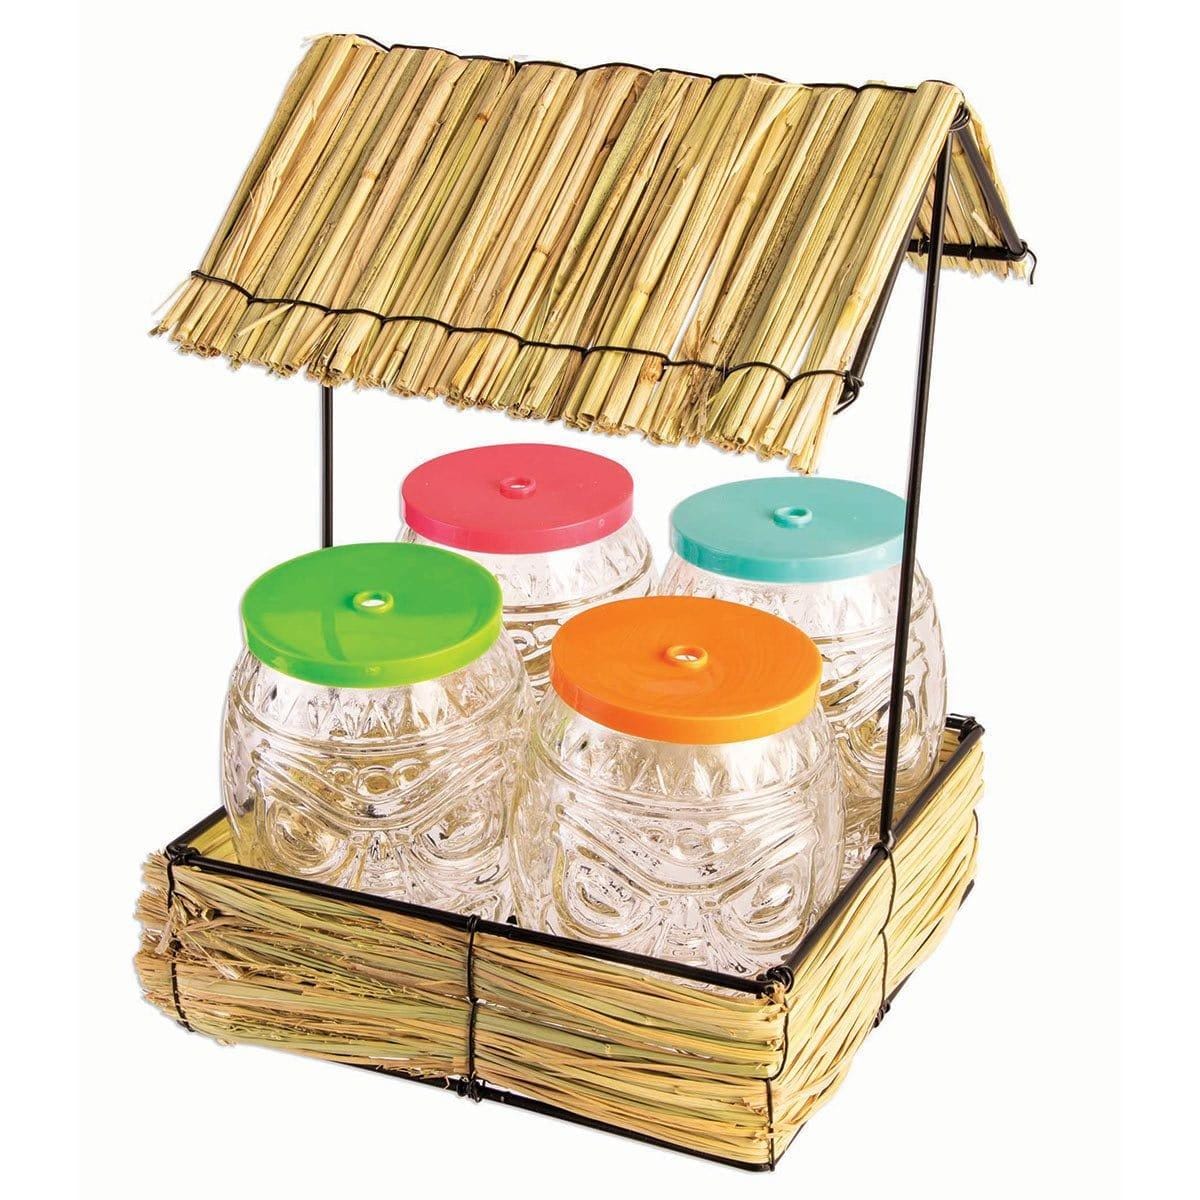 Buy Theme Party Tiki Glasses with Hut Set sold at Party Expert